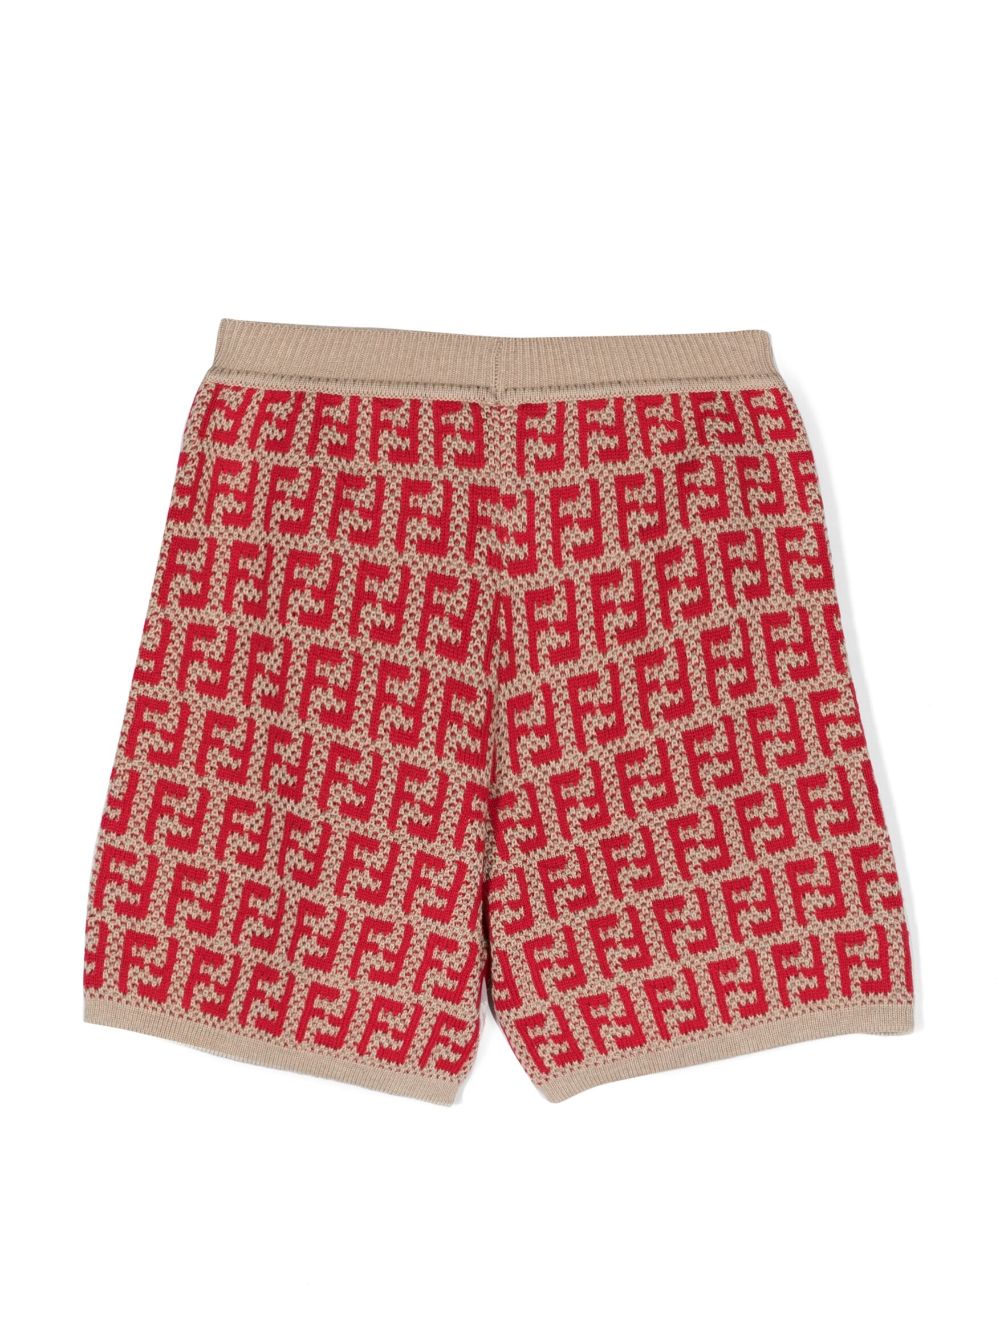 Red and beige shorts for girls